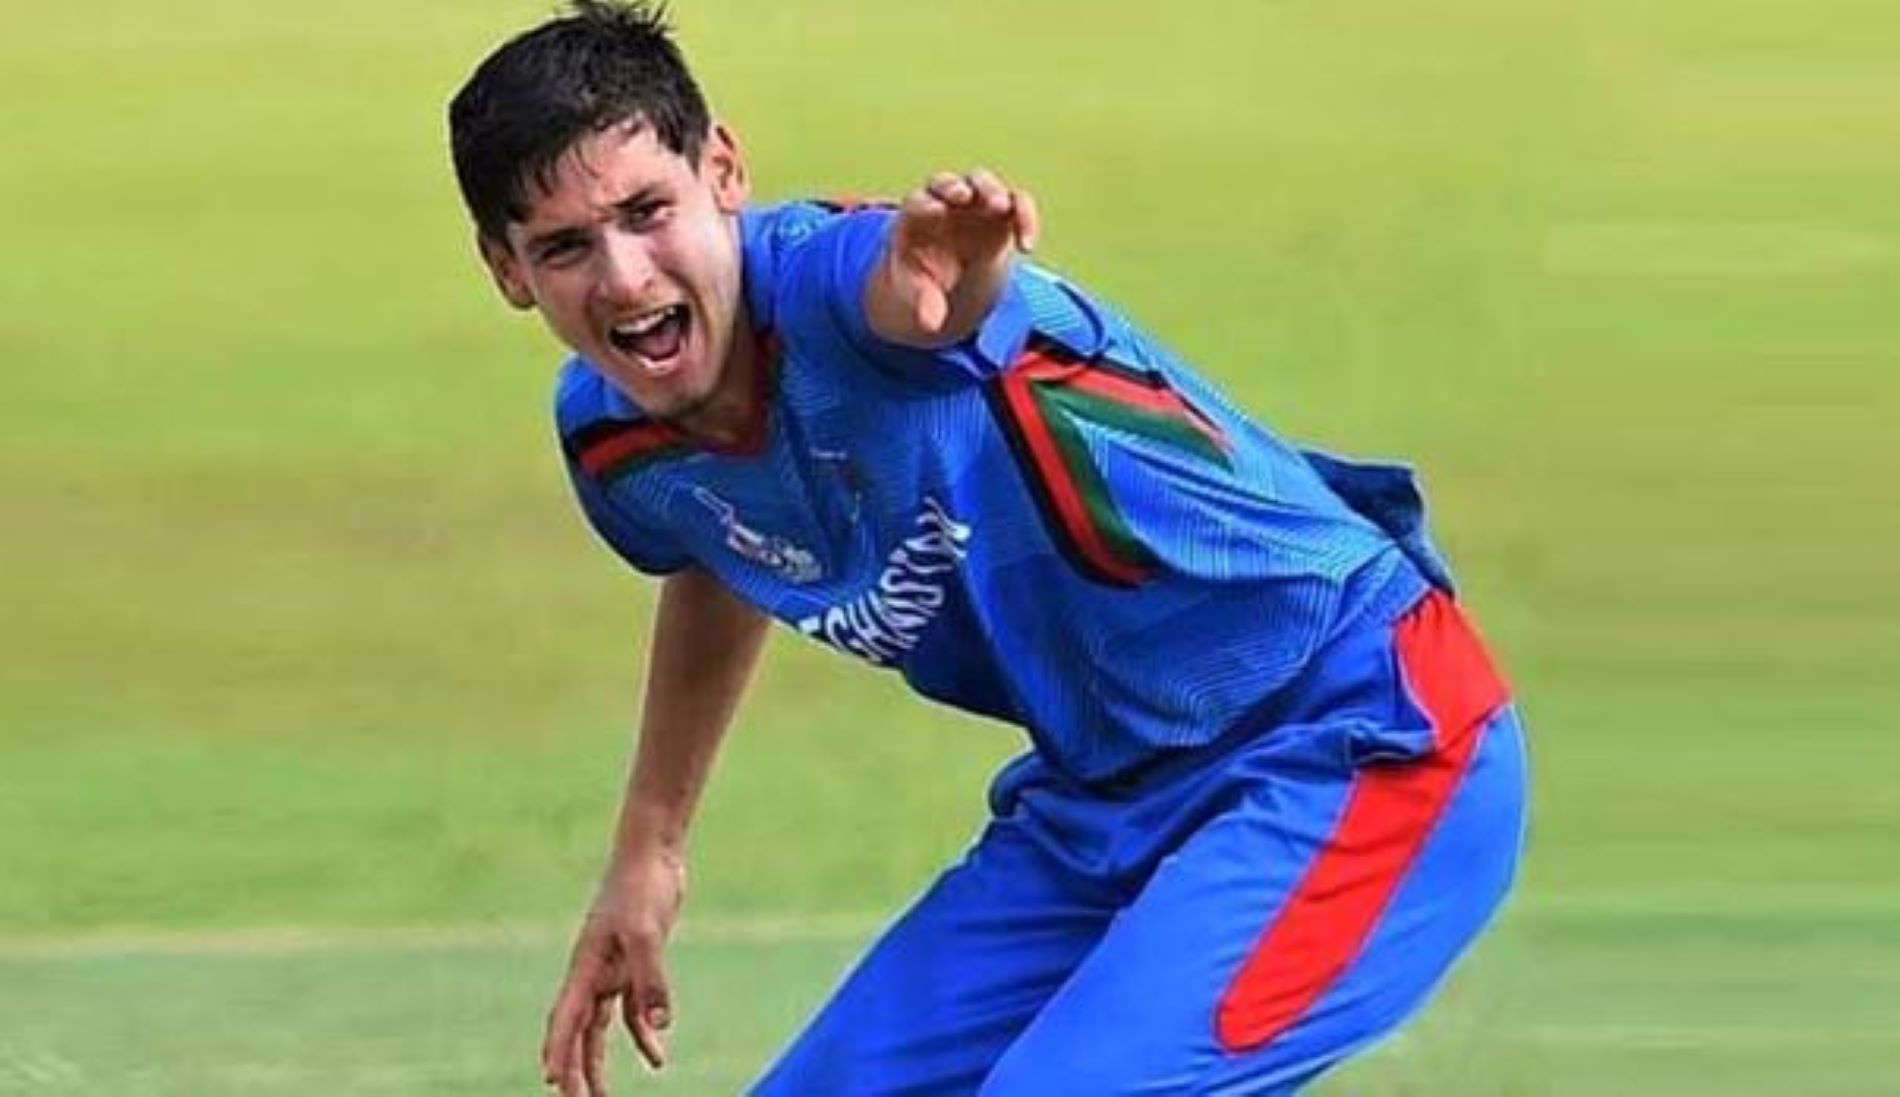 Noor Ahmad is back in the Afghanistan ODI squad that is currently playing Pakistan